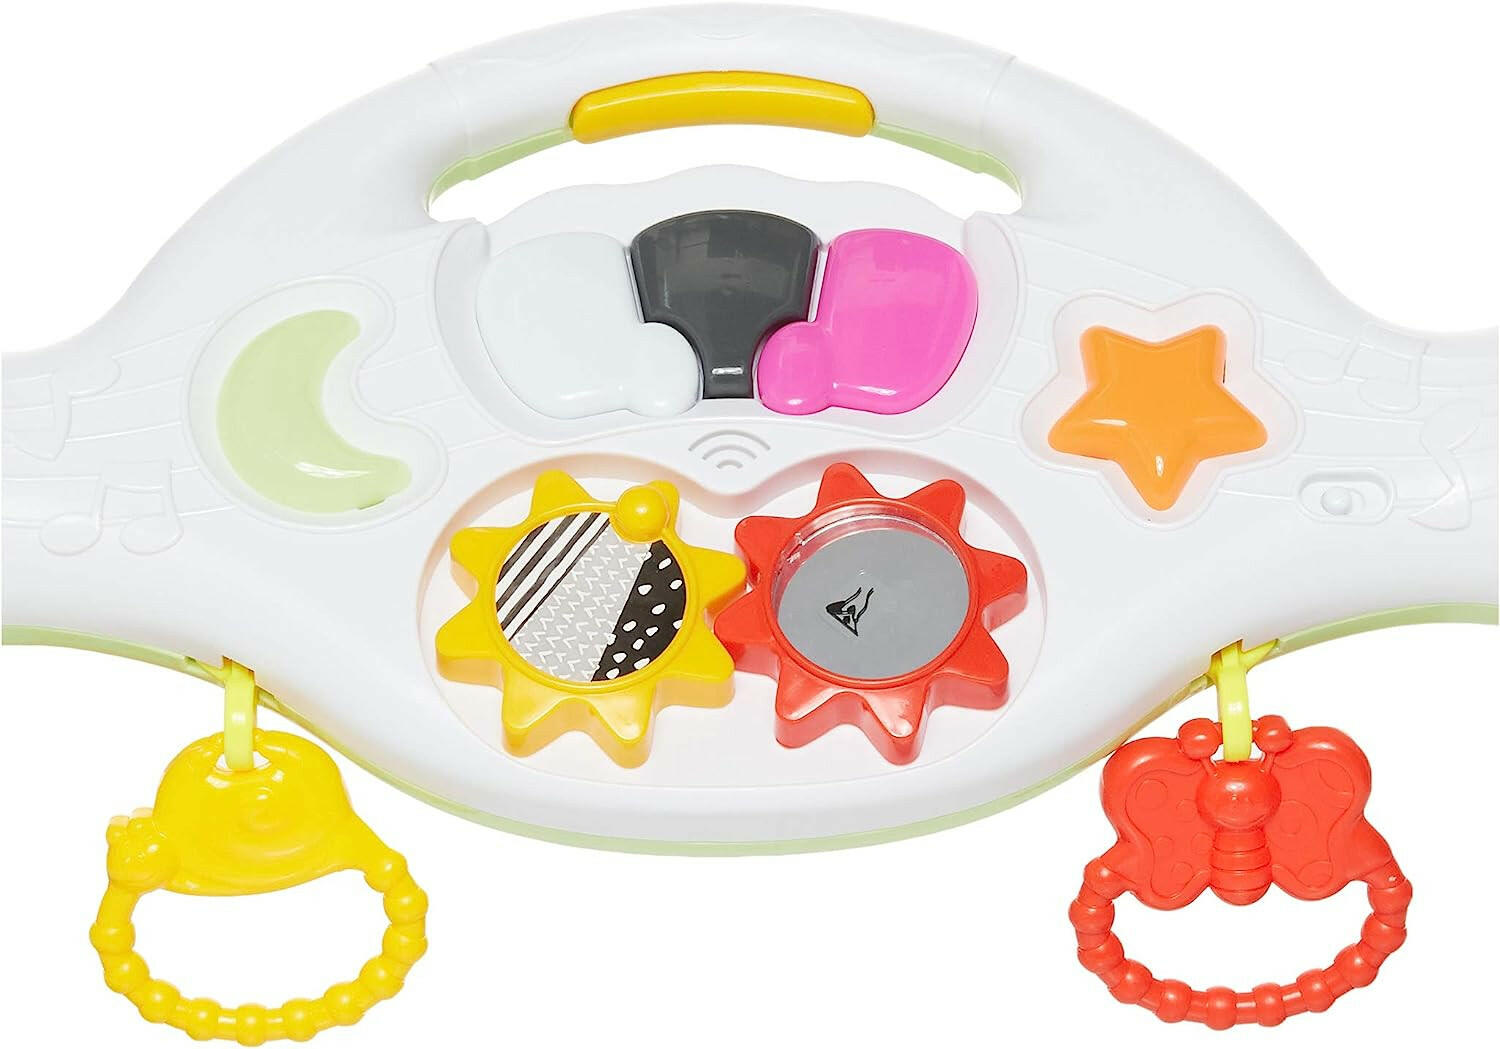 Infantino Grow with Me 3 In 1 Fun Gym.